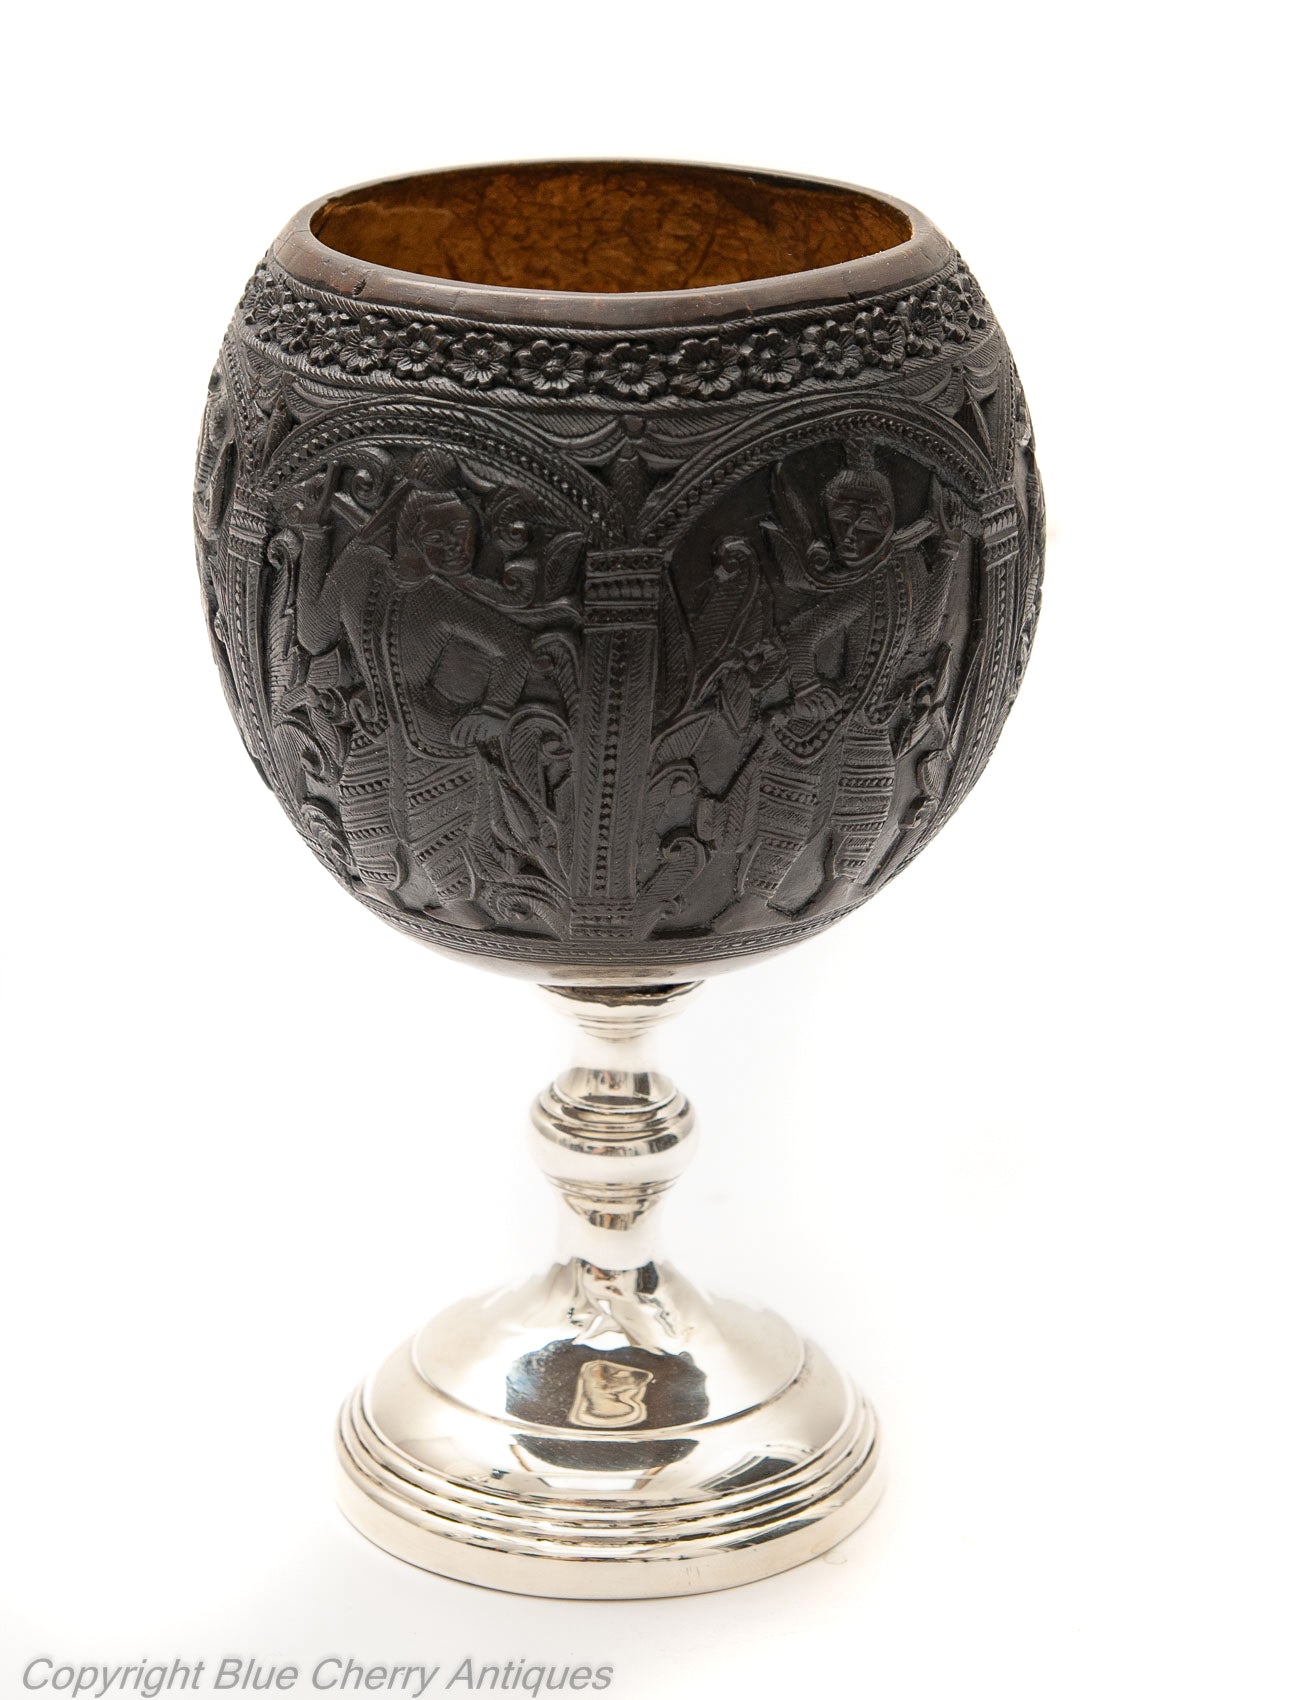 Antique South East Asian Carved Coconut Cup On Silver Pedestal Base c1800 (Code 1780)